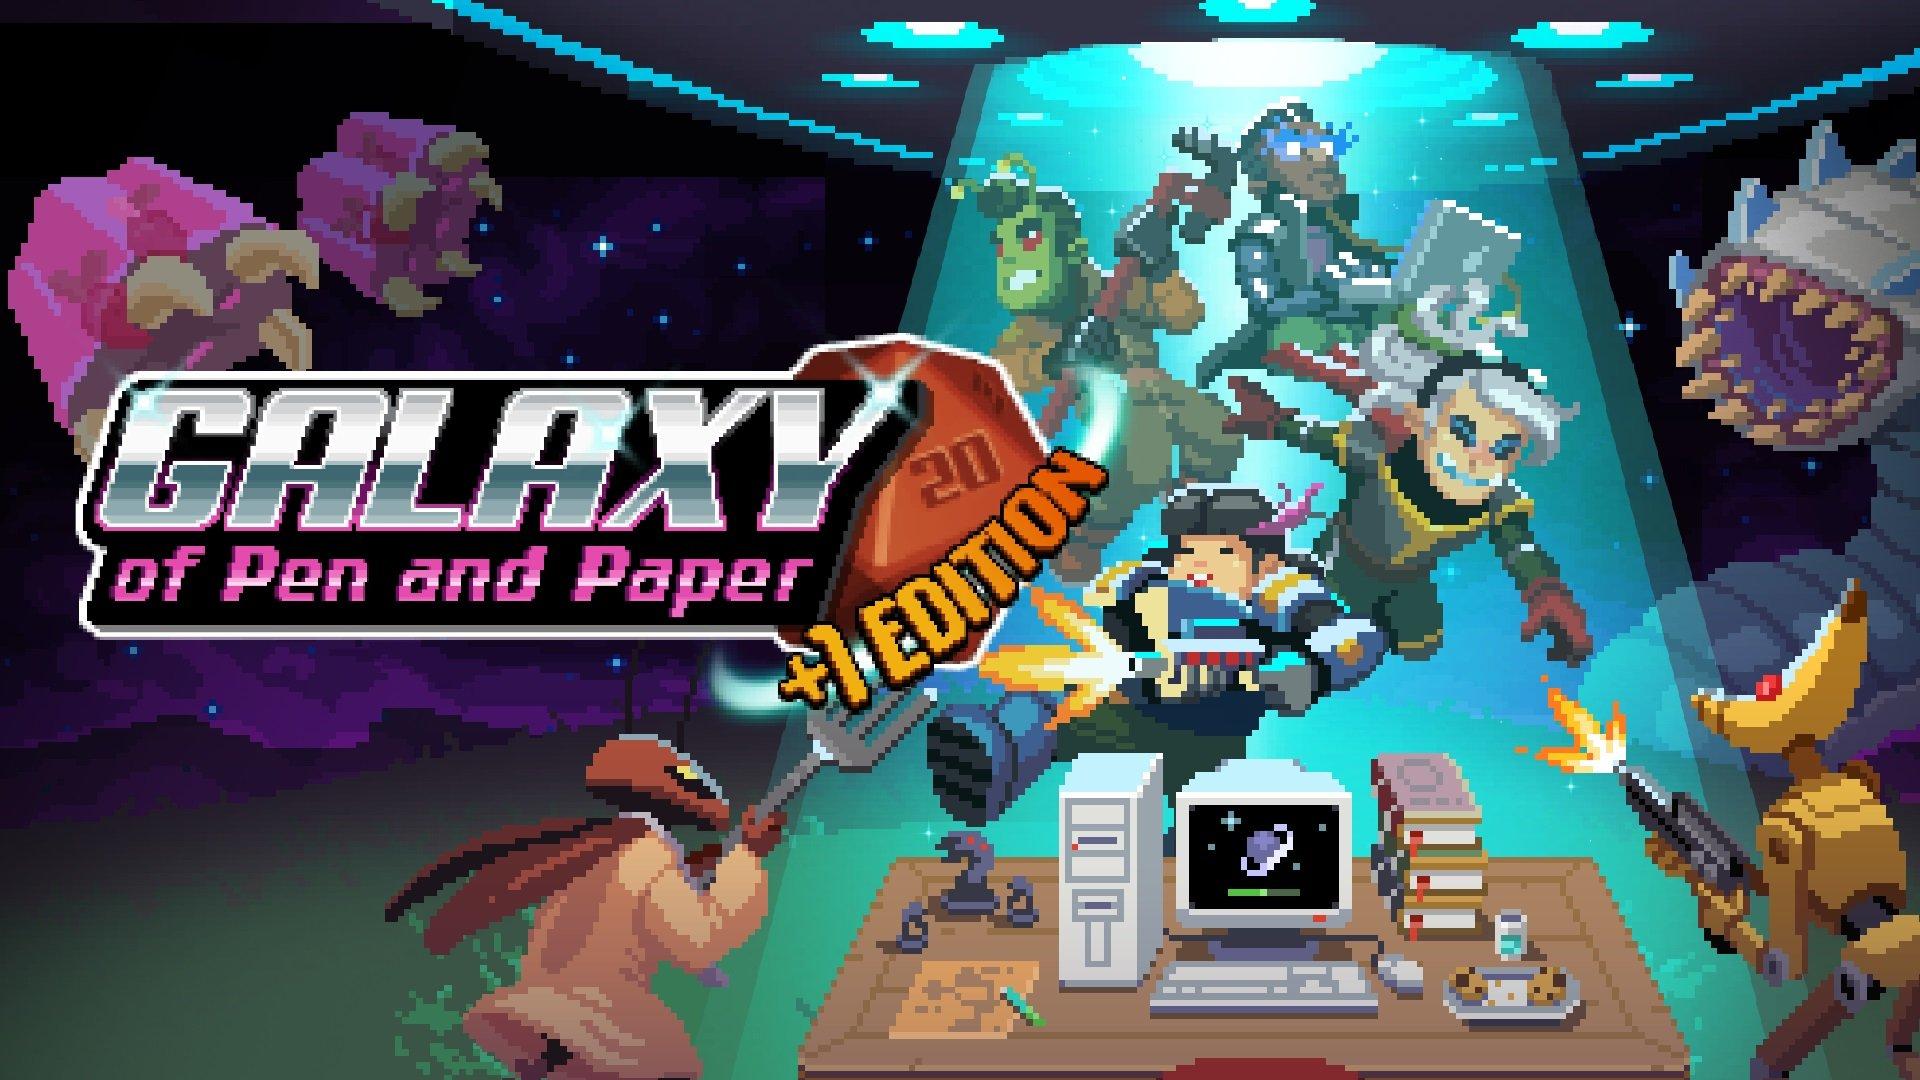 Galaxy of Pen and Paper Plus 1 Edition - Nintendo Switch